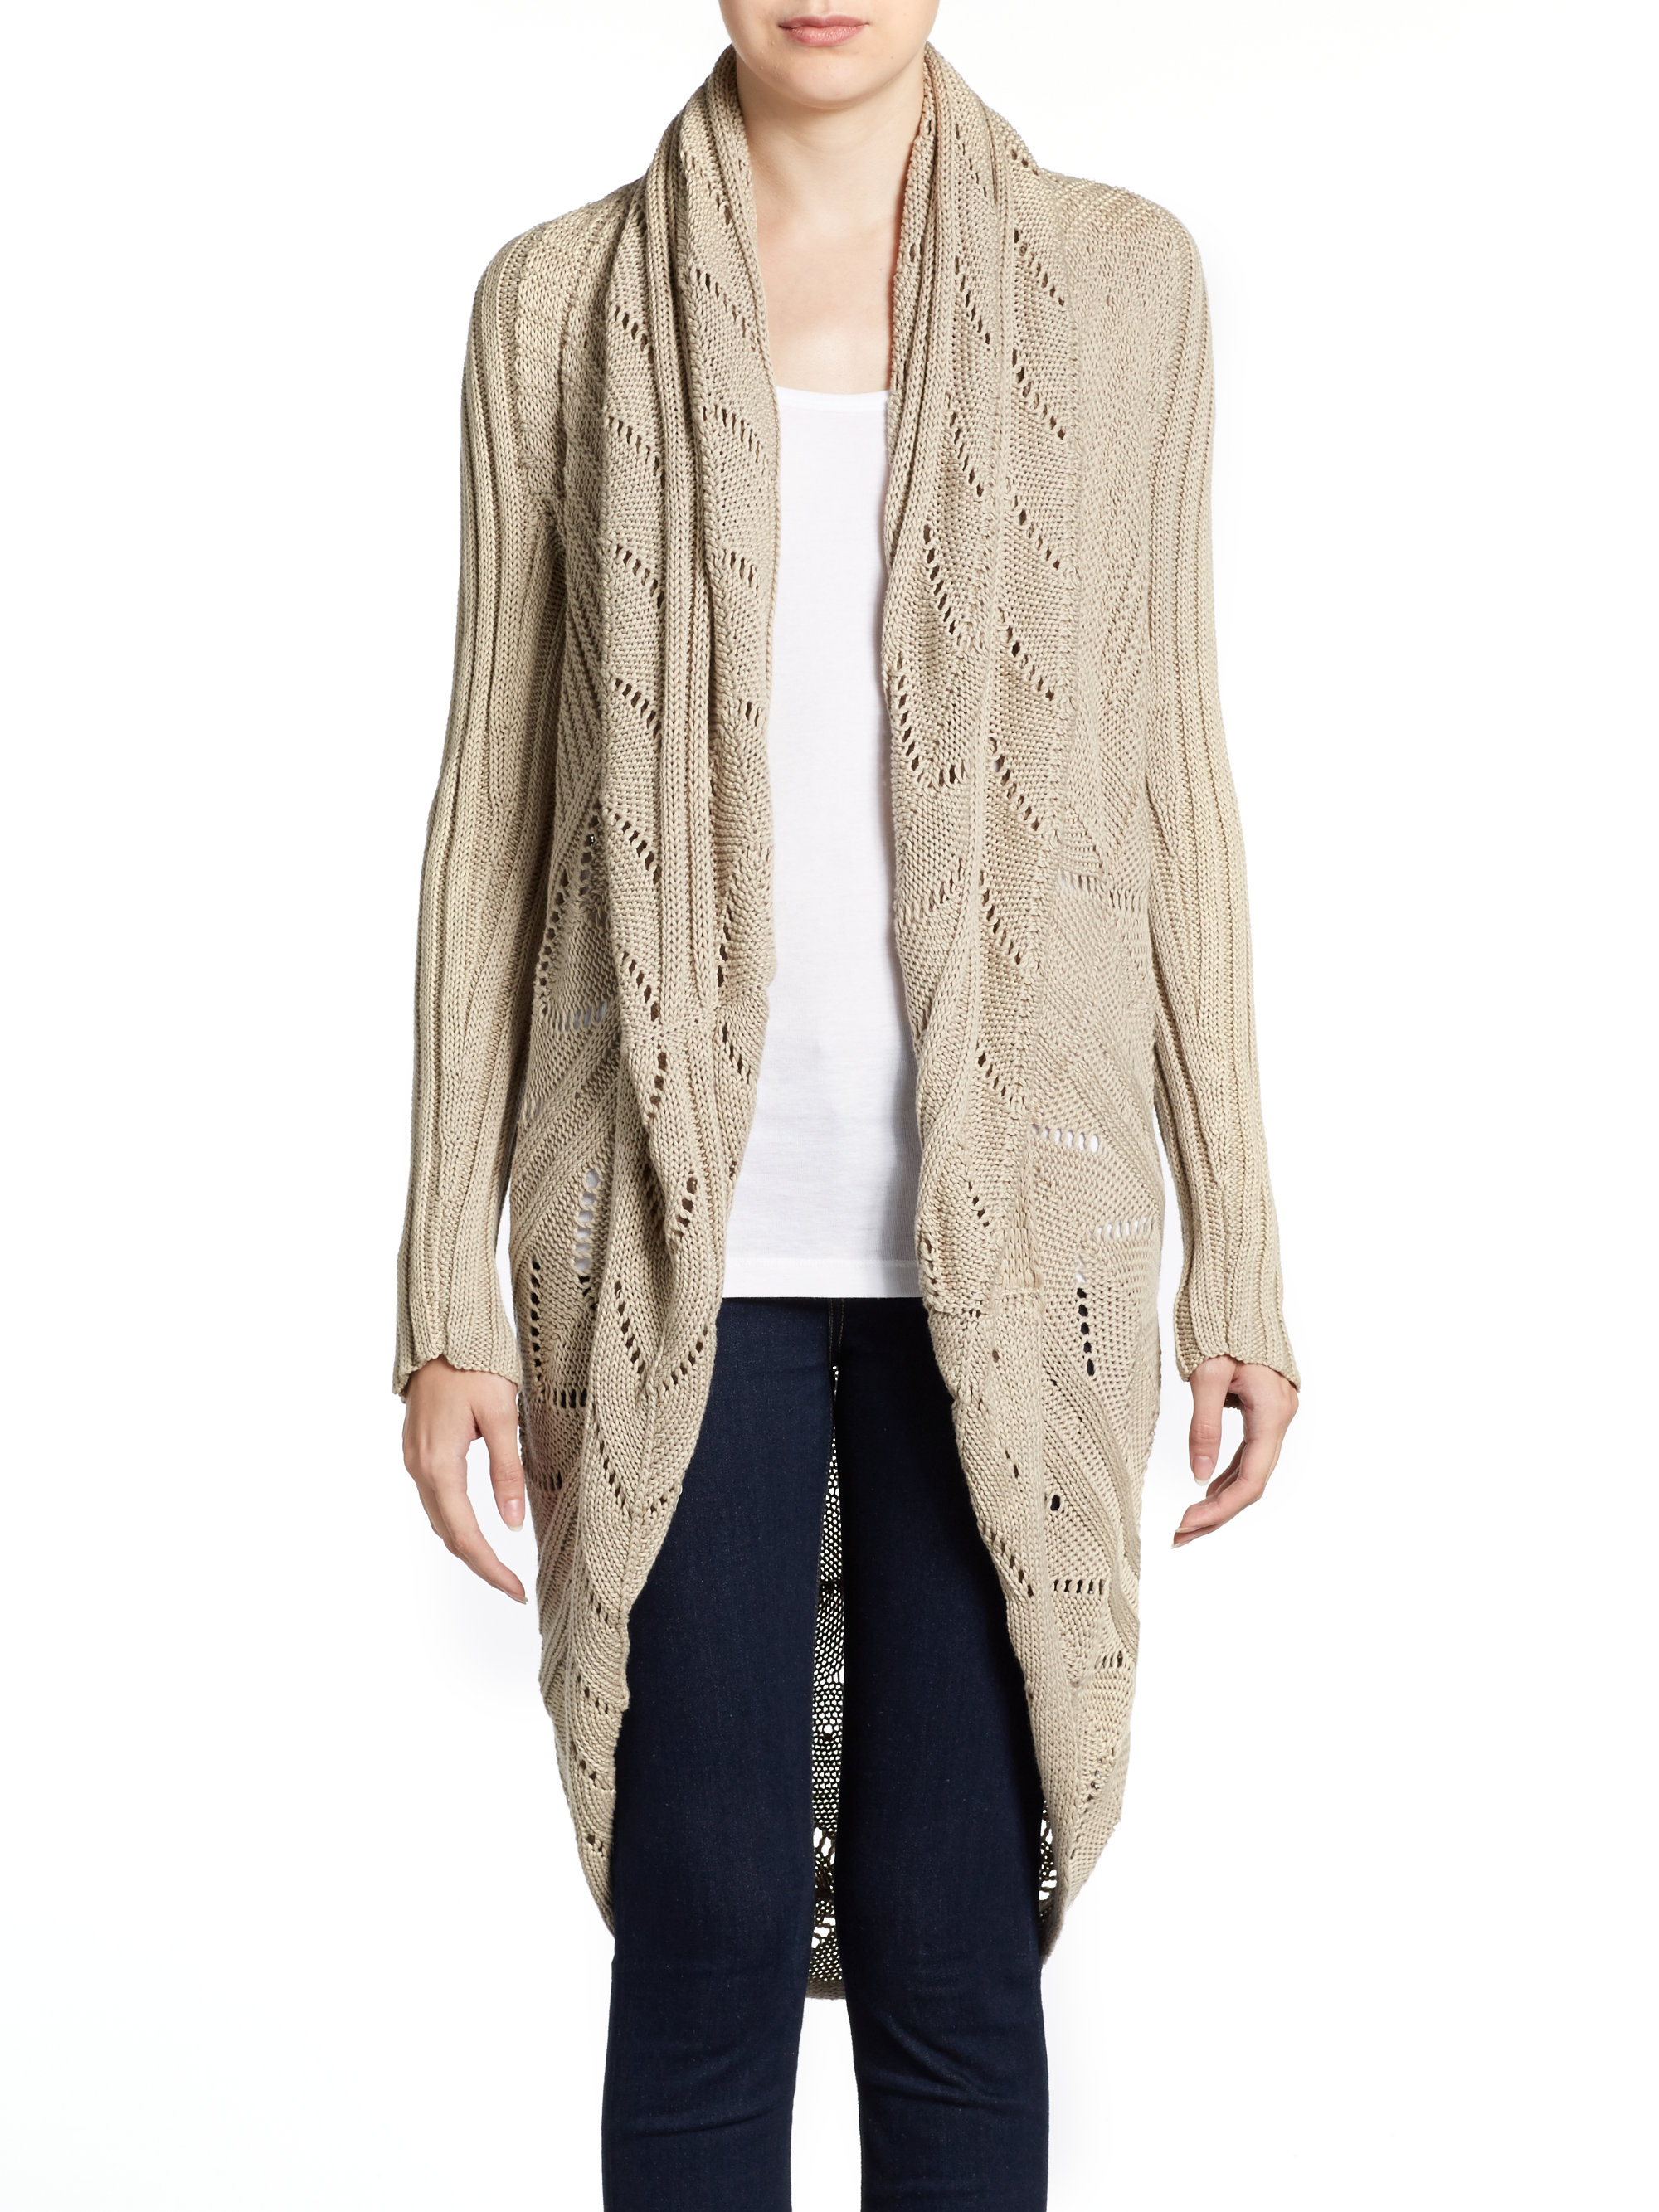 Cotton by autumn cashmere Knit Openfront Cardigan in Natural | Lyst